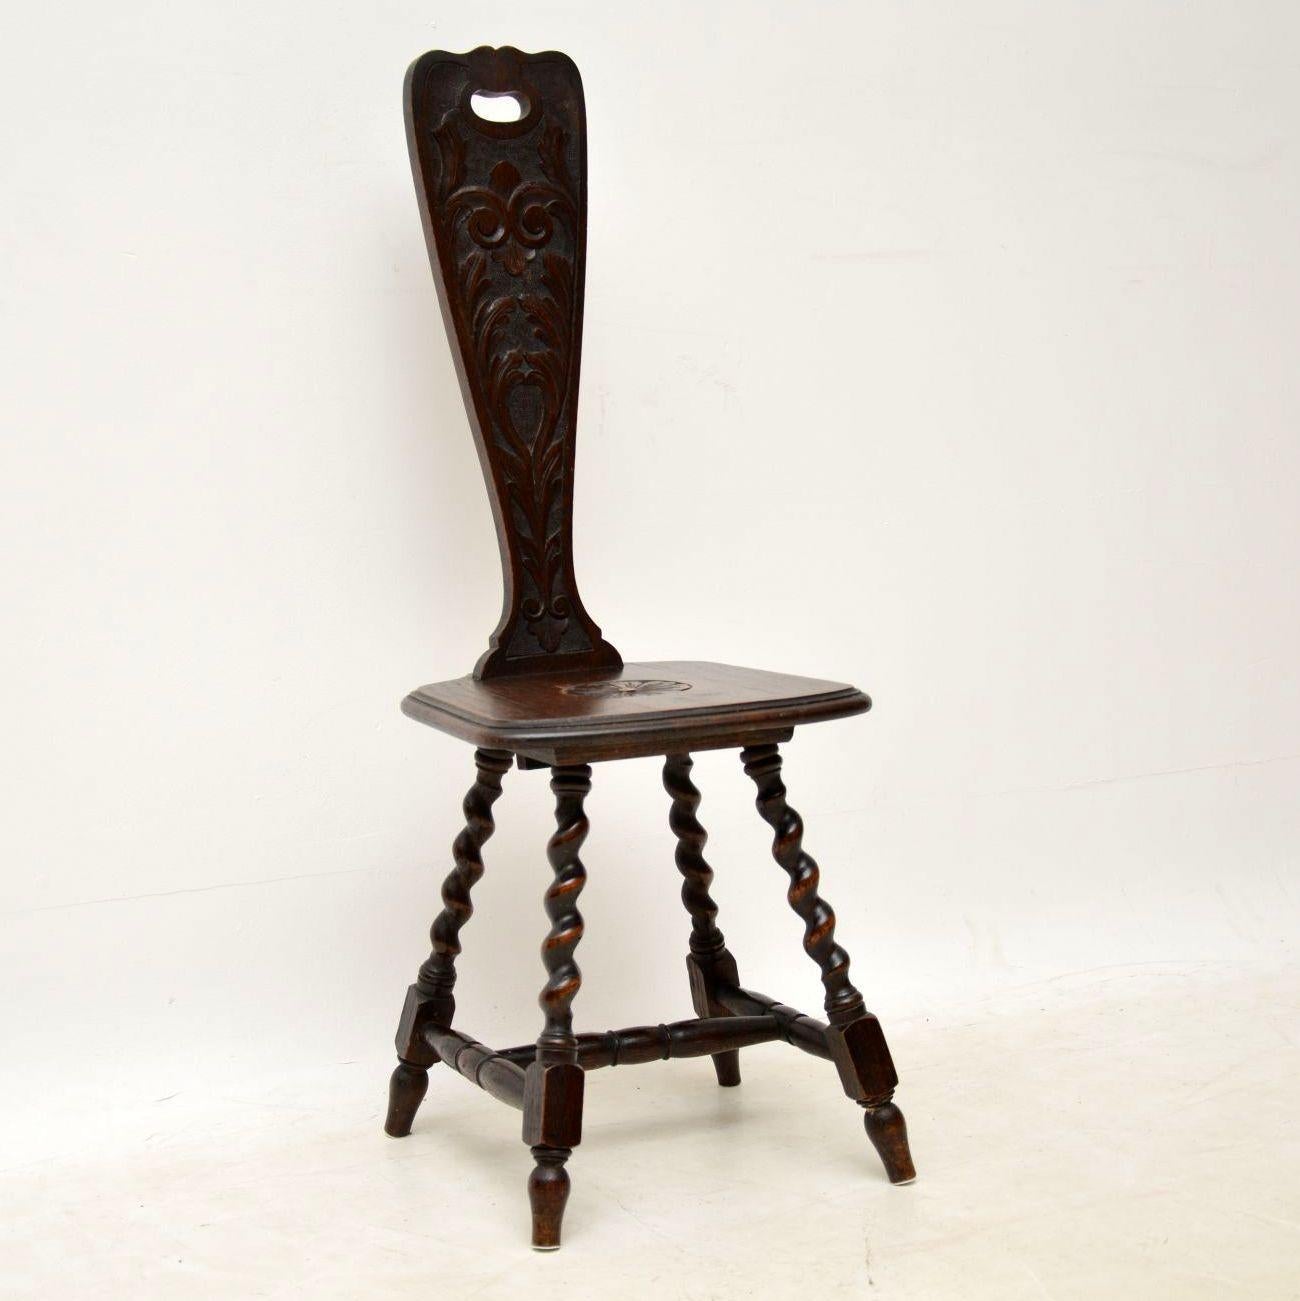 Antique Victorian Welsh oak spinning chair, which I believe is so named because they used to sit on these chairs when using a spinning wheel. This one is solid oak, carved on the back & seat, with turned barley twist legs joined by cross stretchers.